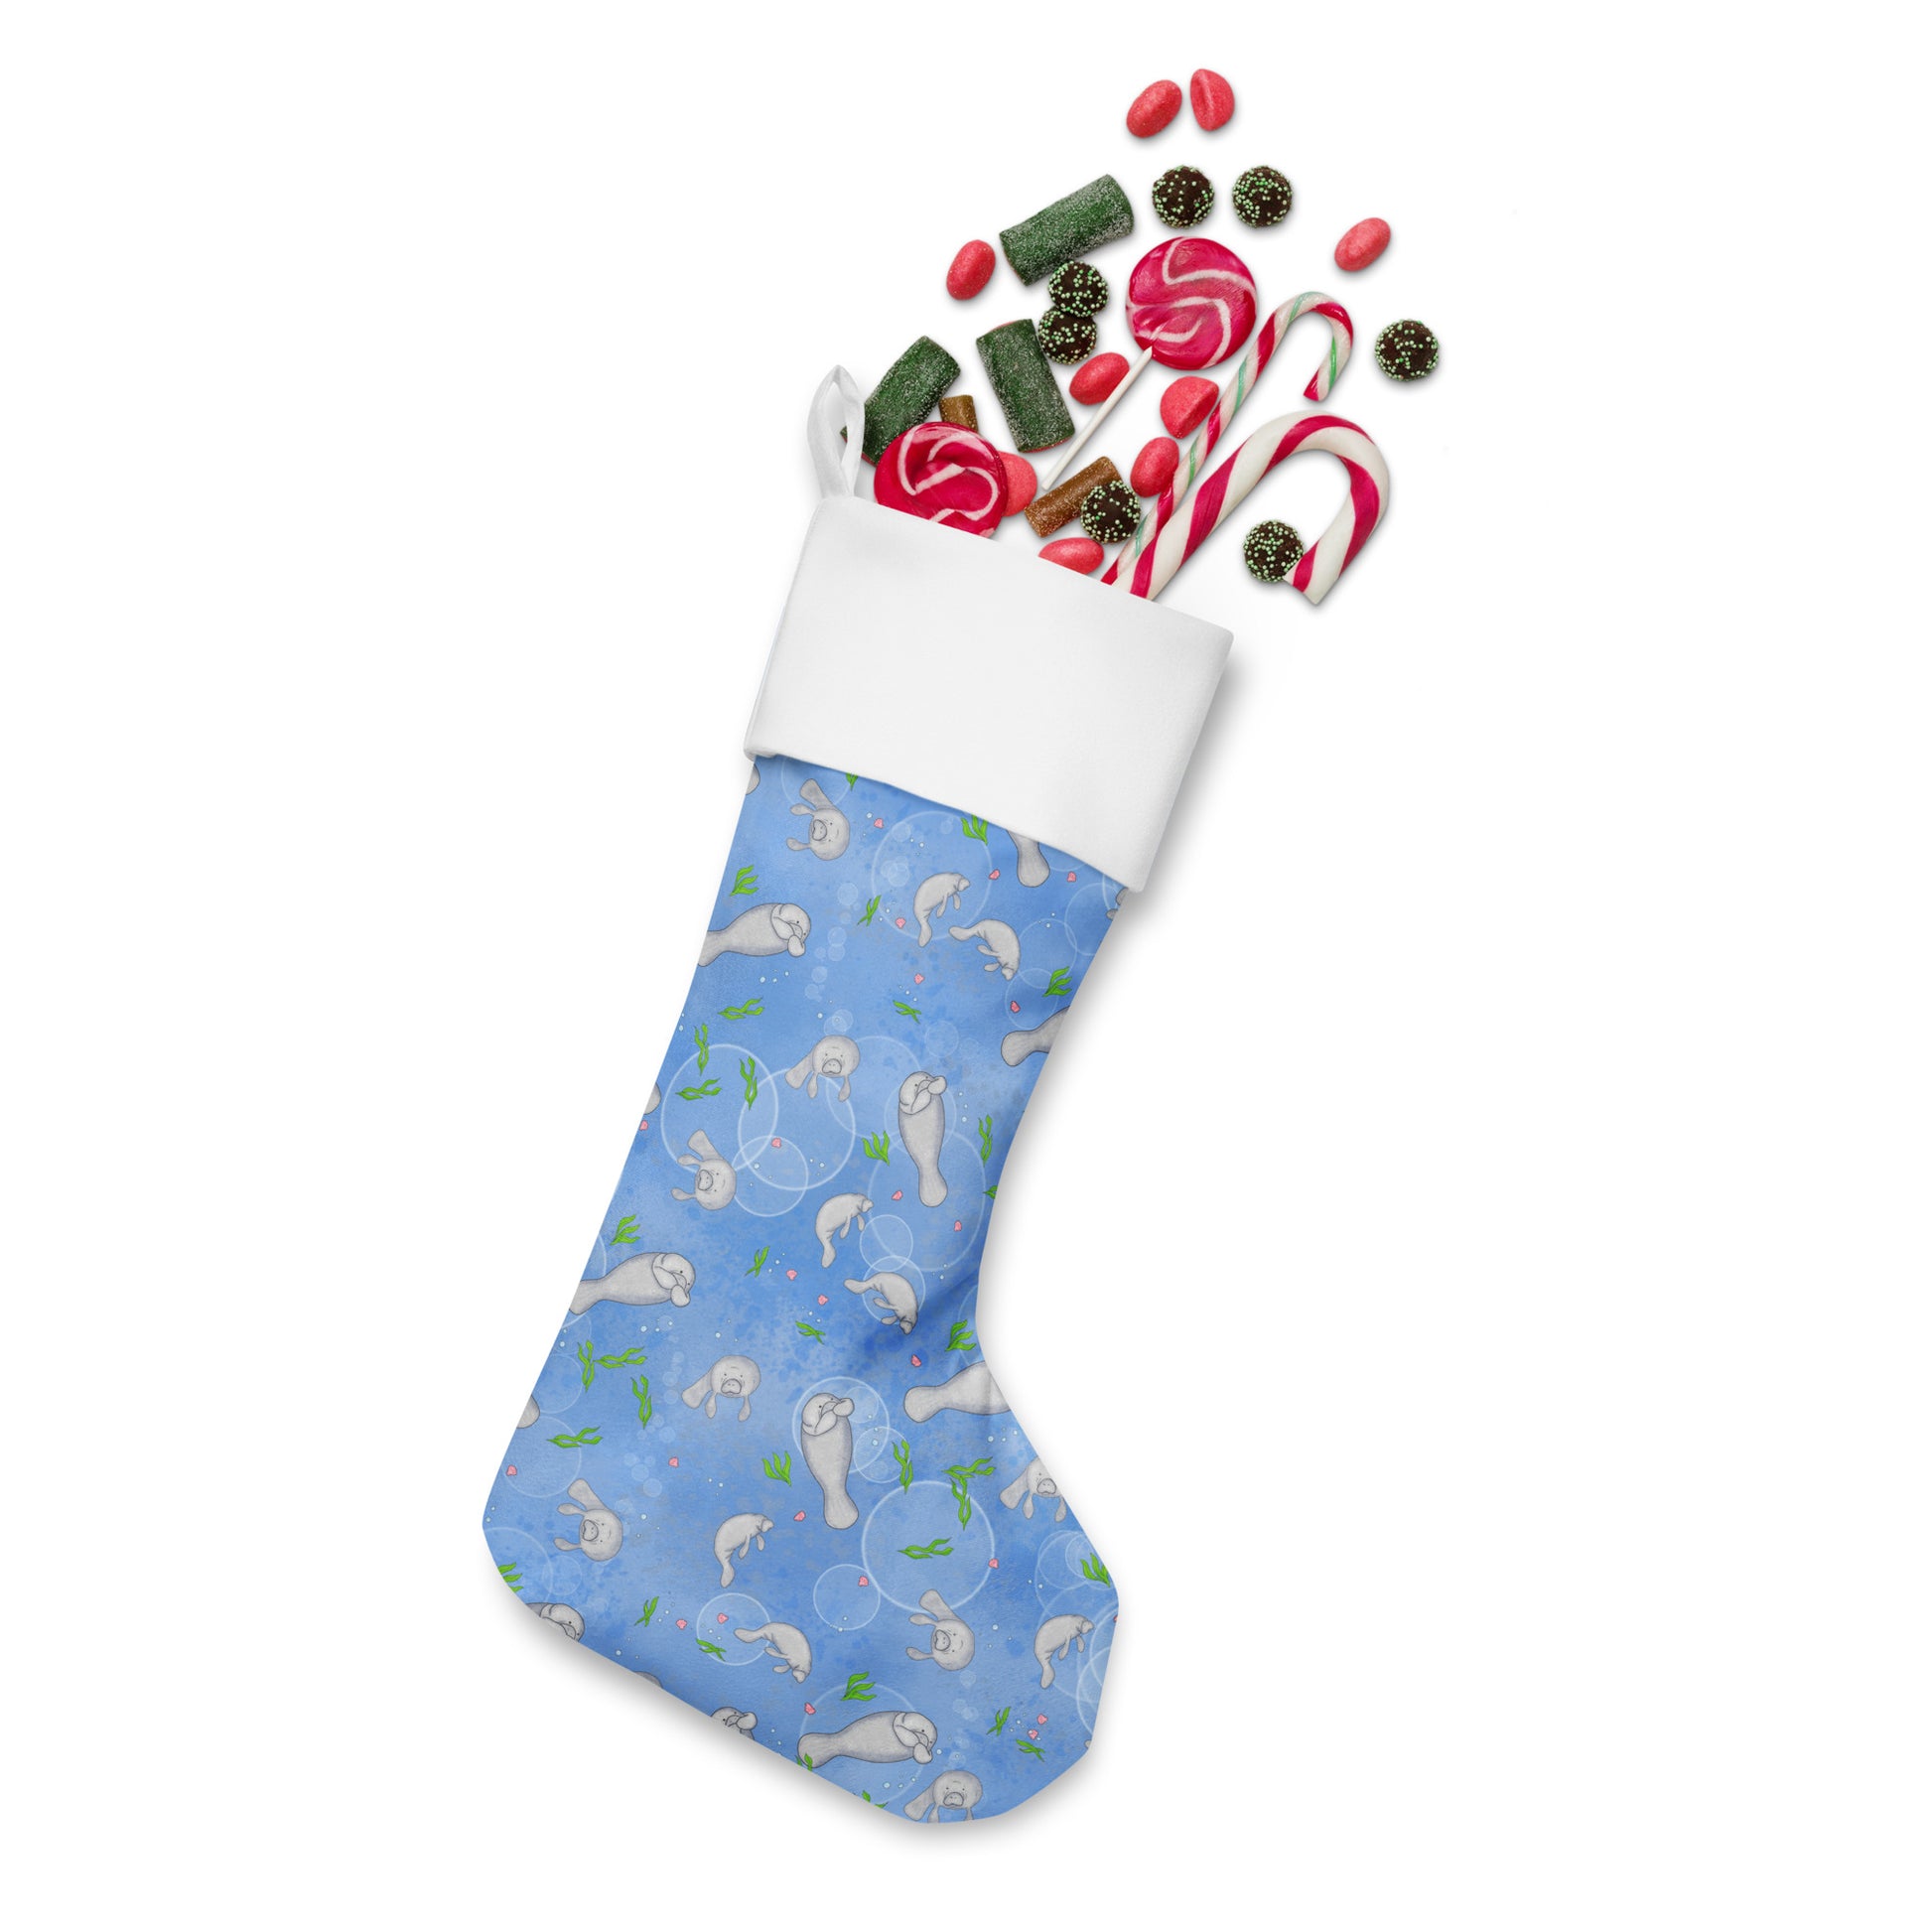 Limited Edition Manatee Christmas Stocking.  7 by 18 inches. The front has a hand-illustrated manatee design with an off-white polyester fabric on the back. It has a white fold-over cuff and a loop for hanging. Shown stuffed with candy.